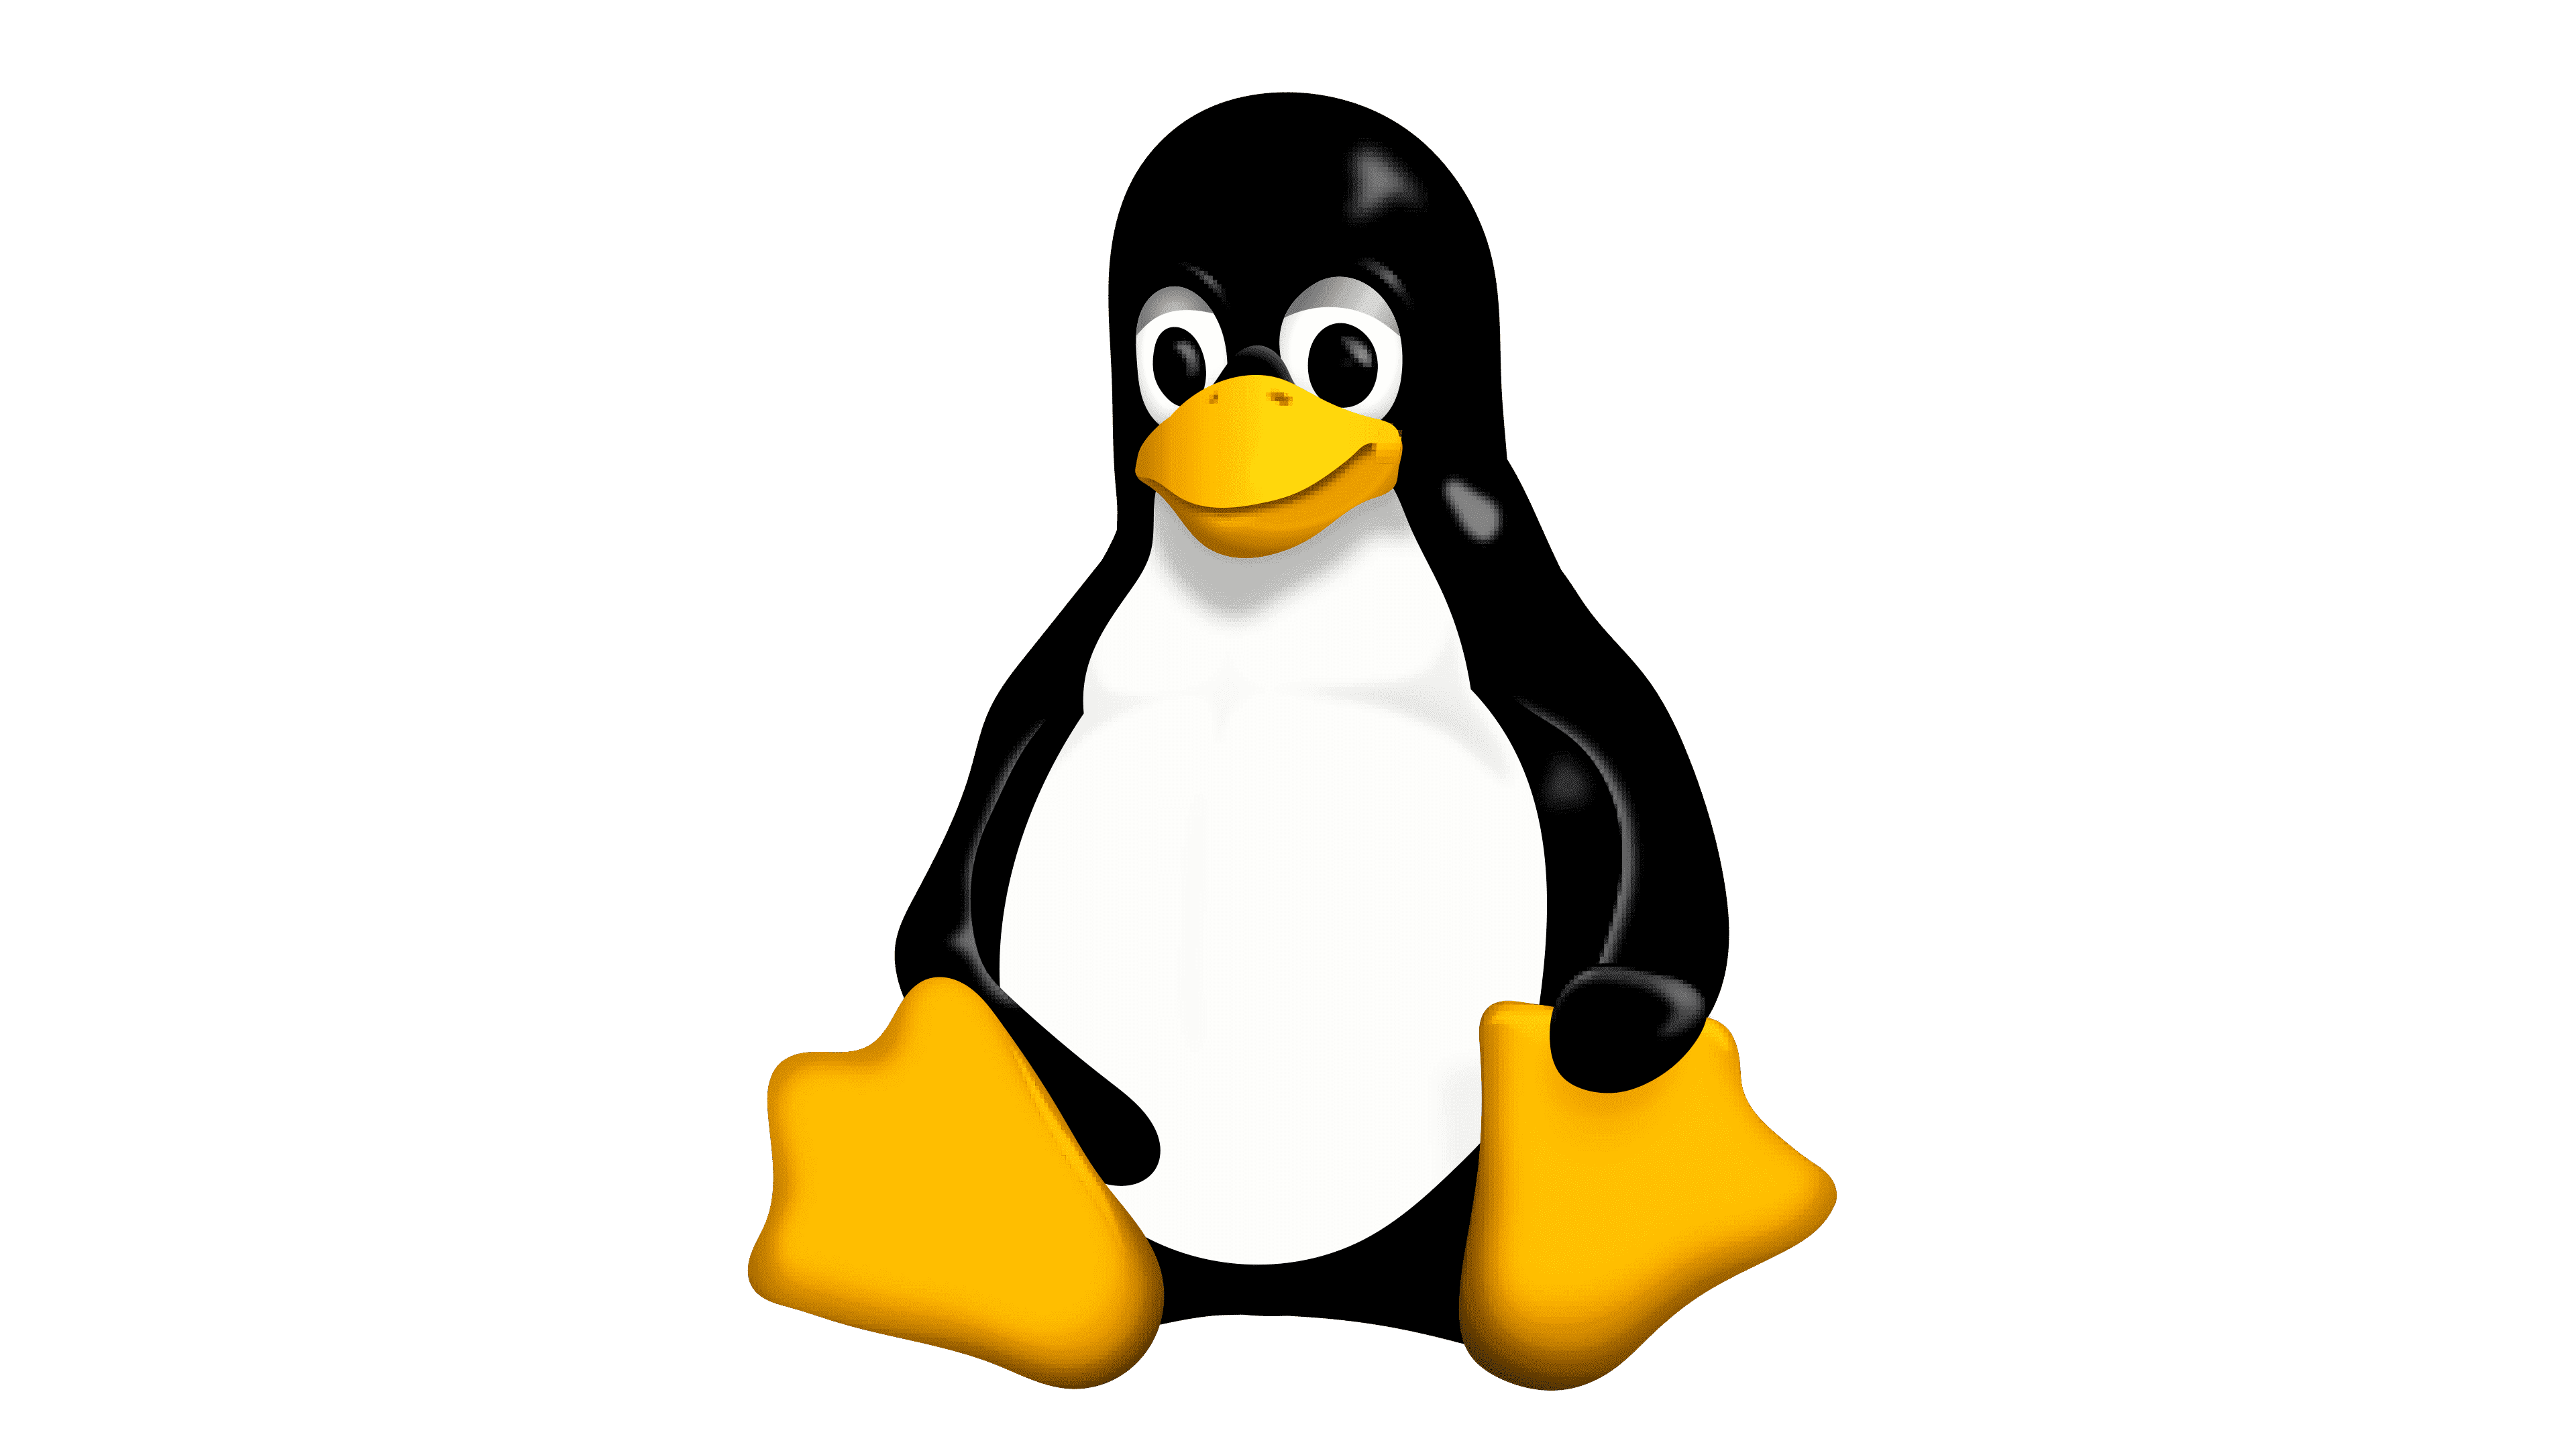 Excited to share insights into the Linux boot process!